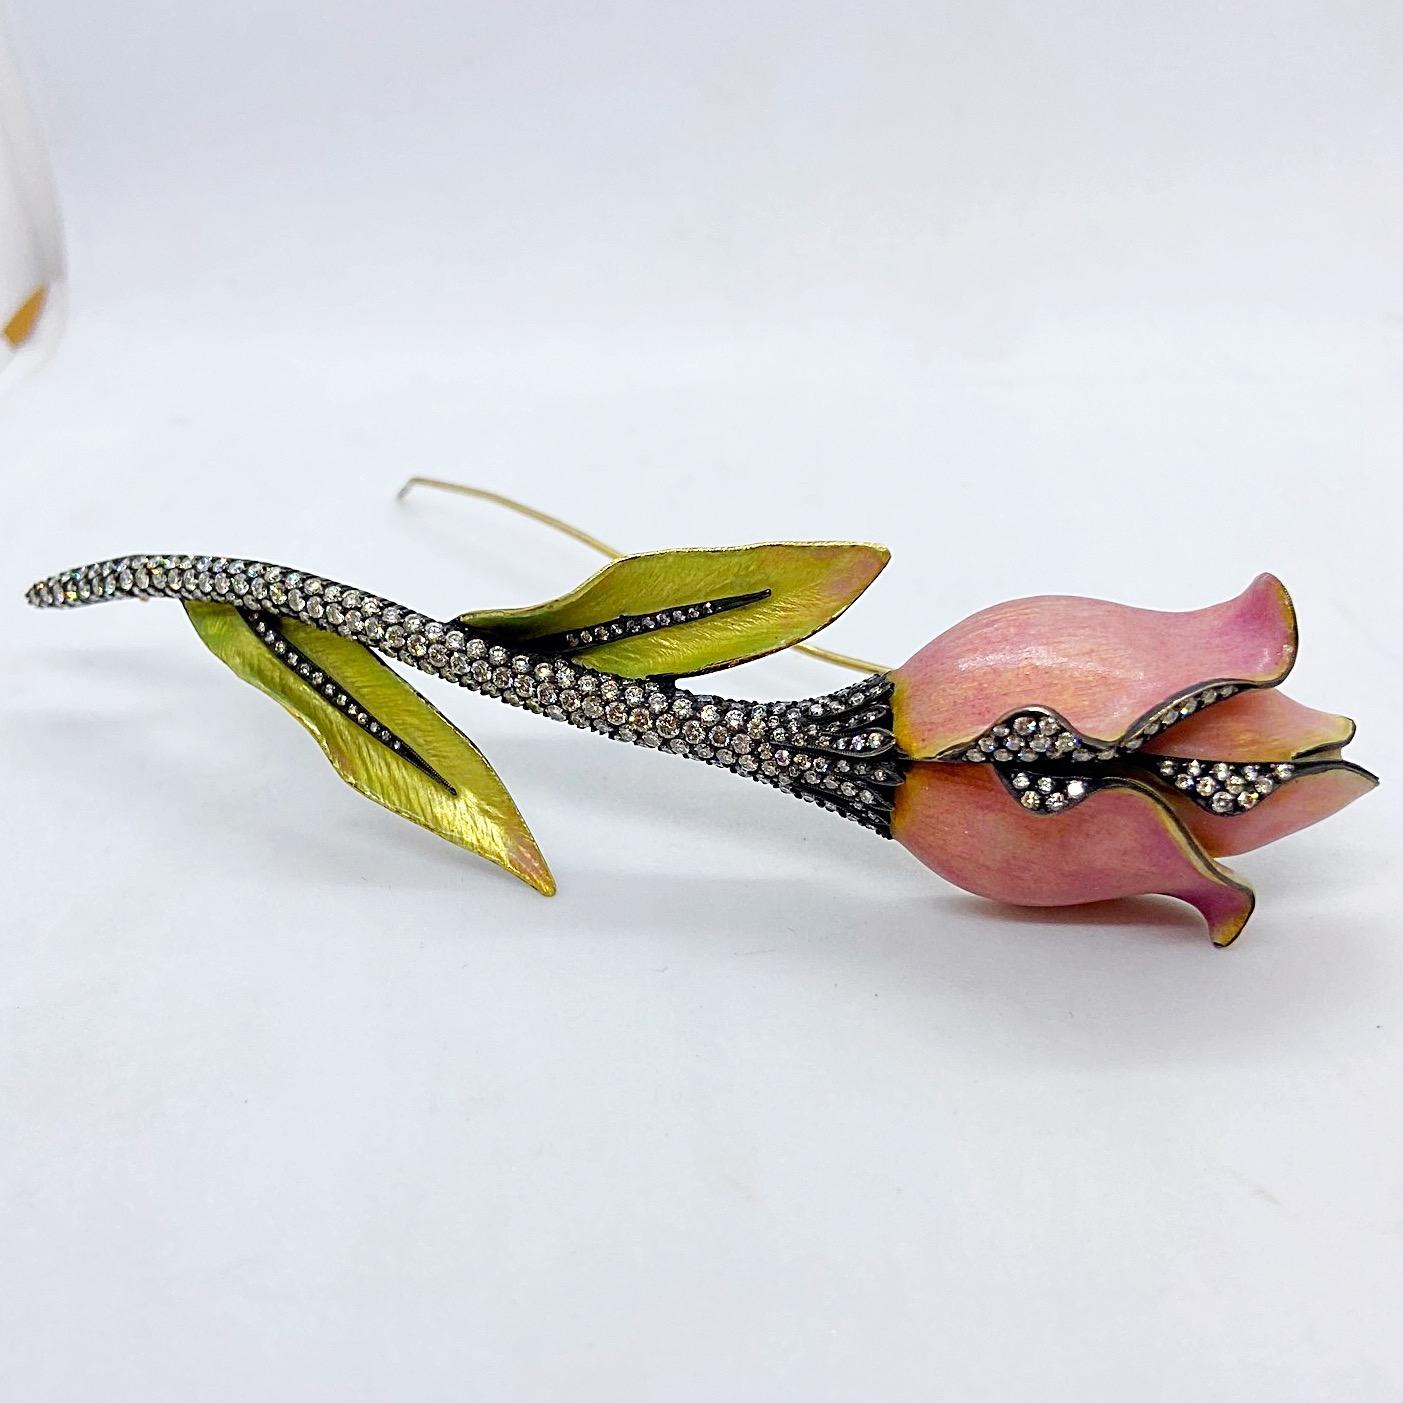 This 18 karat yellow gold rose brooch is designed with opalescent pink enamel for the flower and greenish yellow enamel for the leaves. The stem is set with round brilliant diamonds set in a blackened sterling silver. The leaves and petals are also